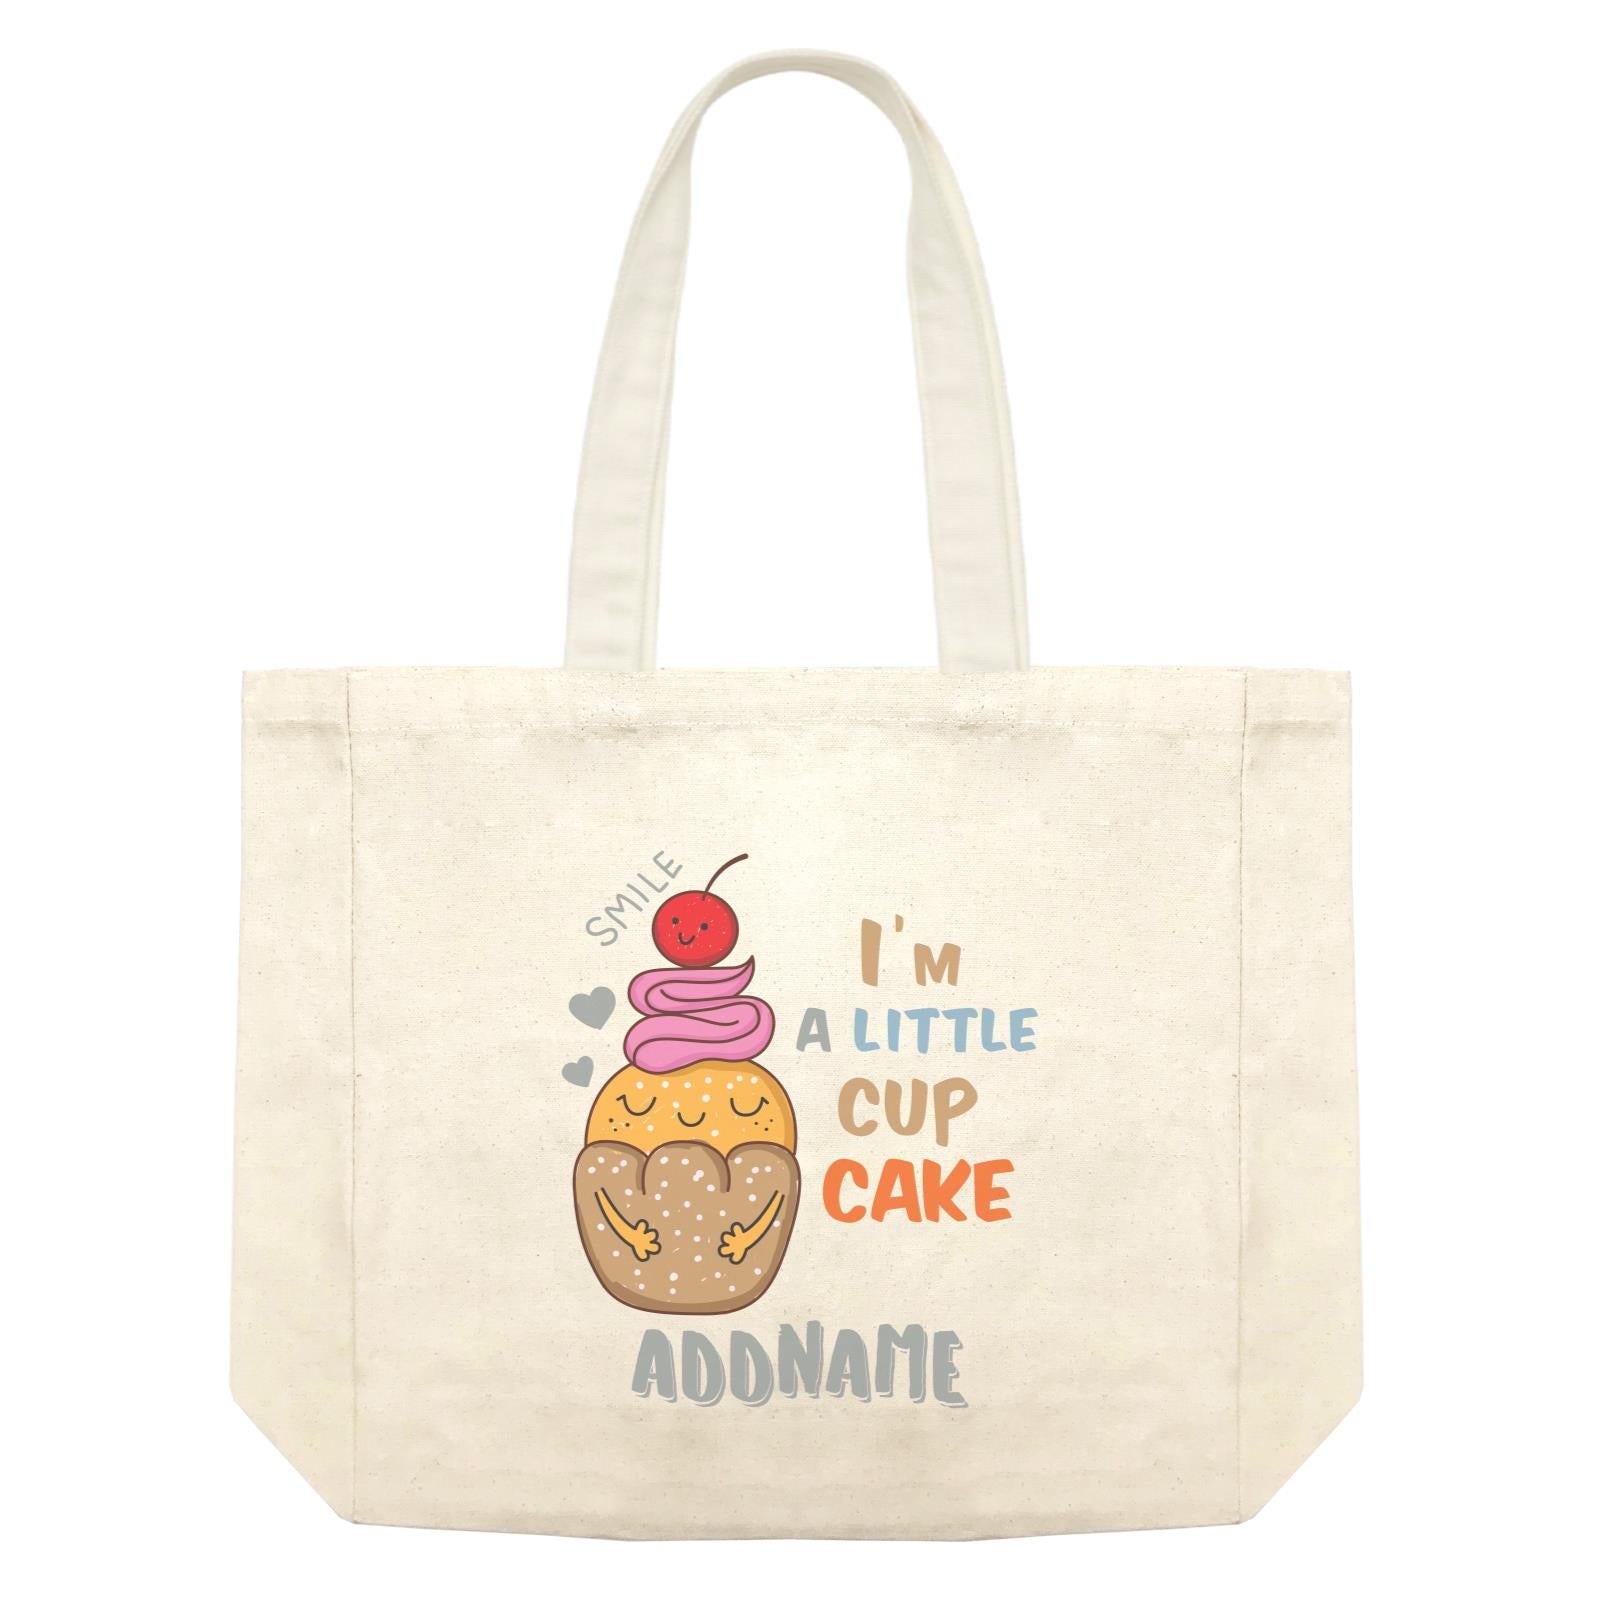 Cool Cute Foods I'm A Little Cup Cake Addname Shopping Bag